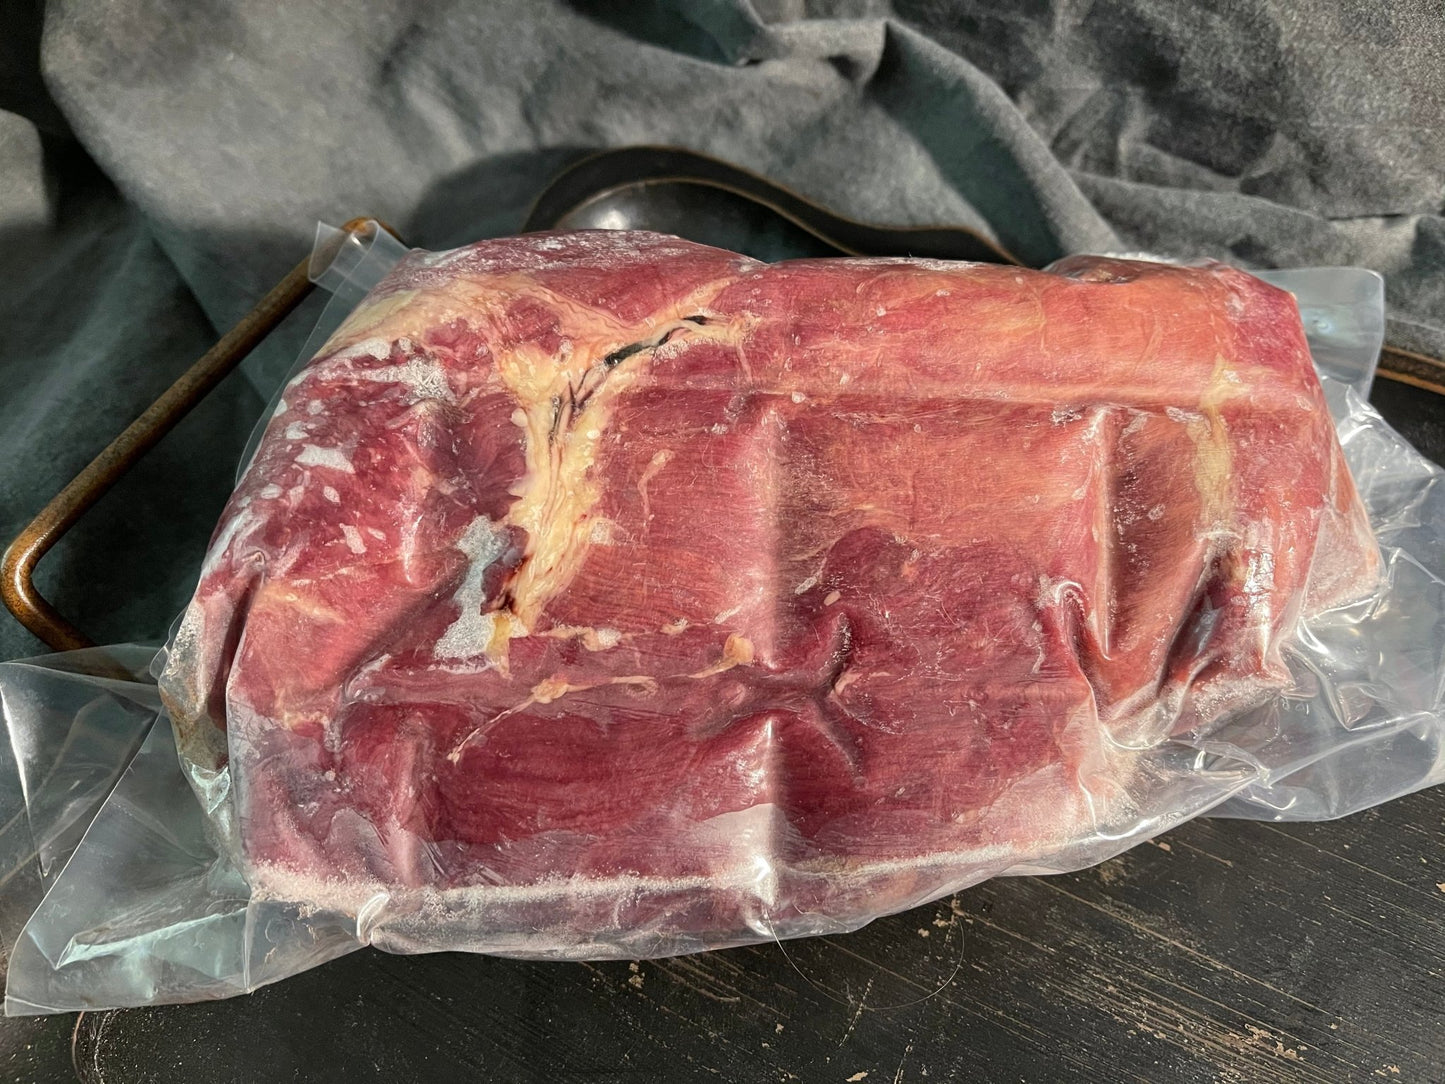 100% All-Natural Grass-Fed "Misfit" Skirt Steak - The Hufeisen-Ranch (WYO Wagyu)